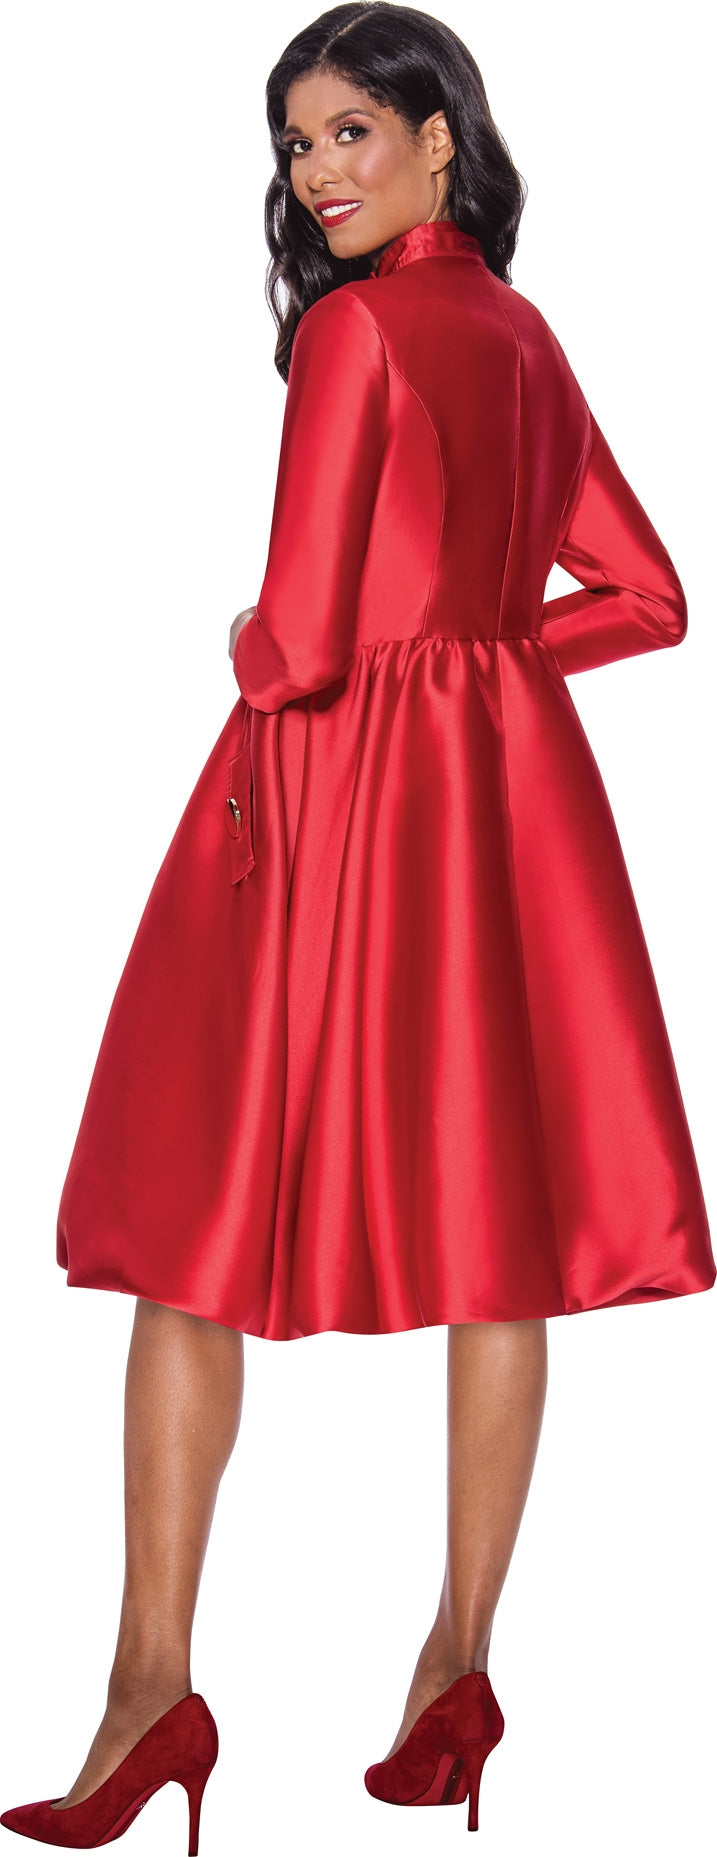 Church Dress By Nubiano 12241-Red | Church suits for less